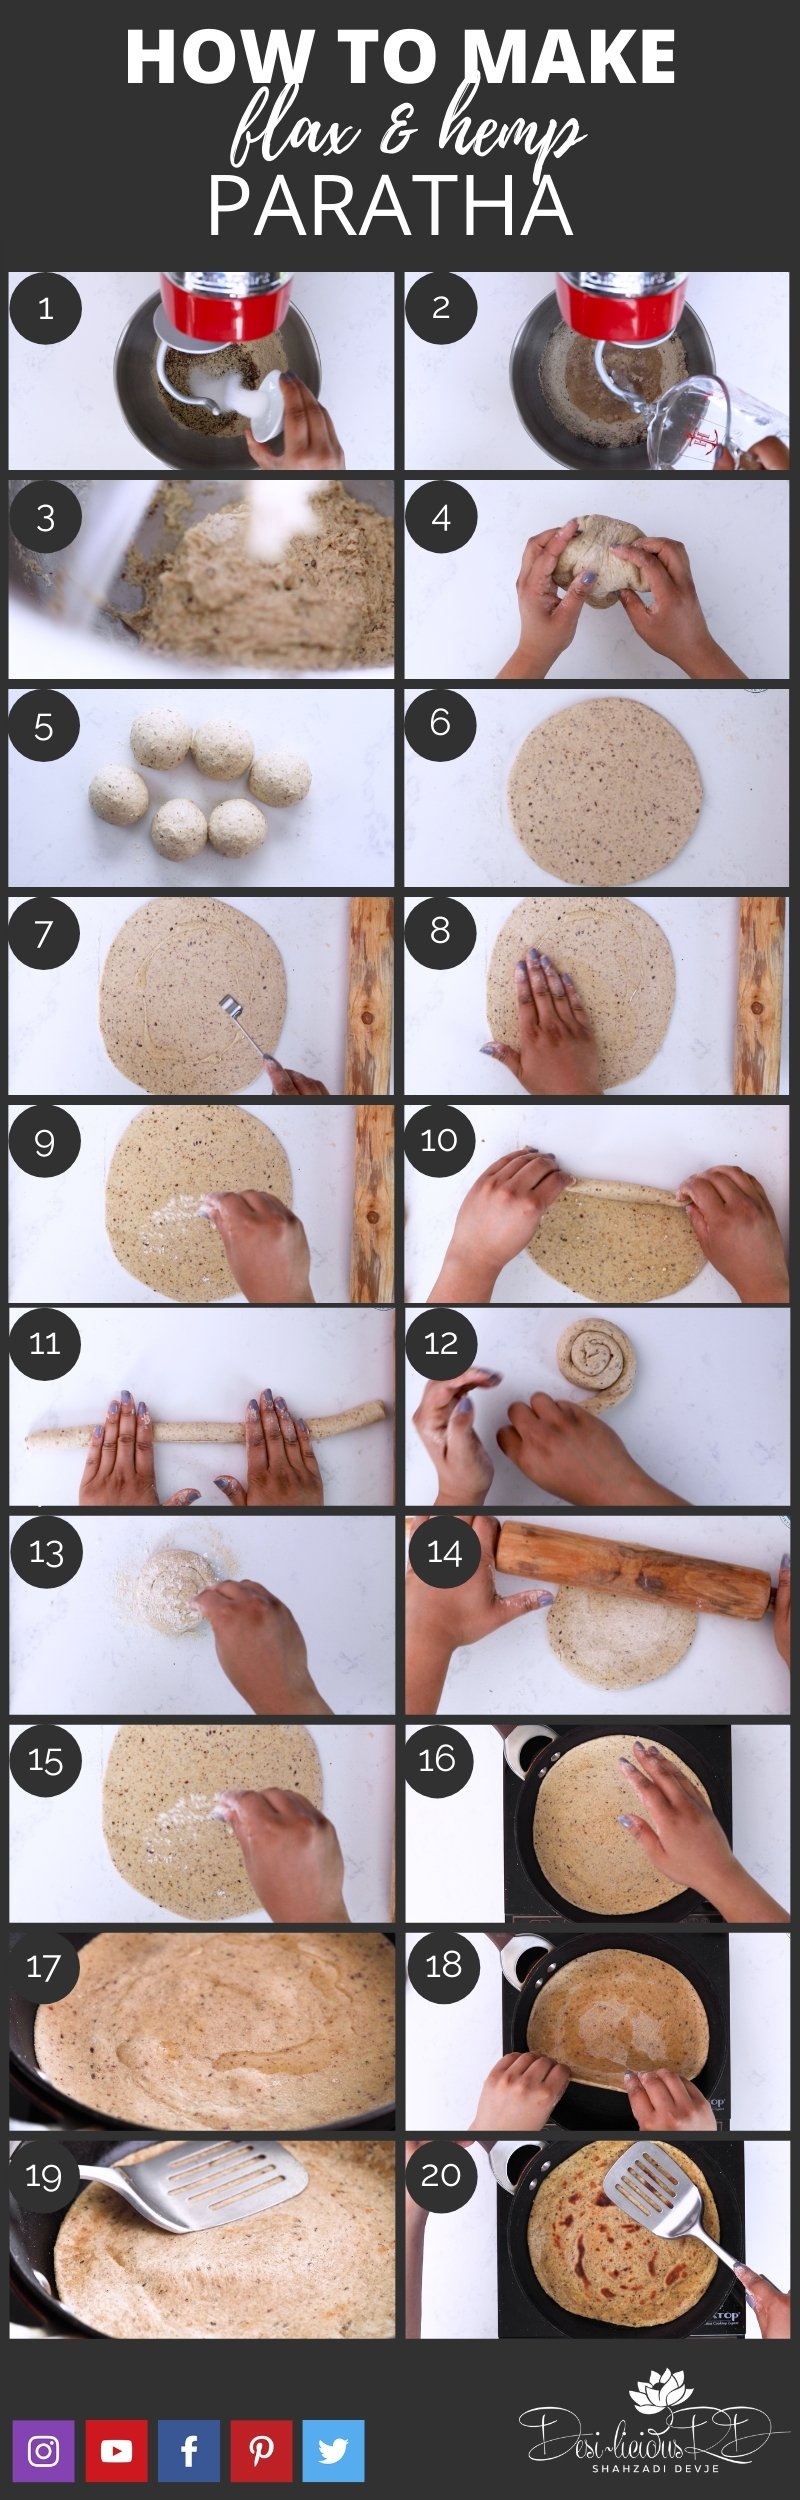 graphic showing step by step images of how to make homemade paratha (Indian flat bread)